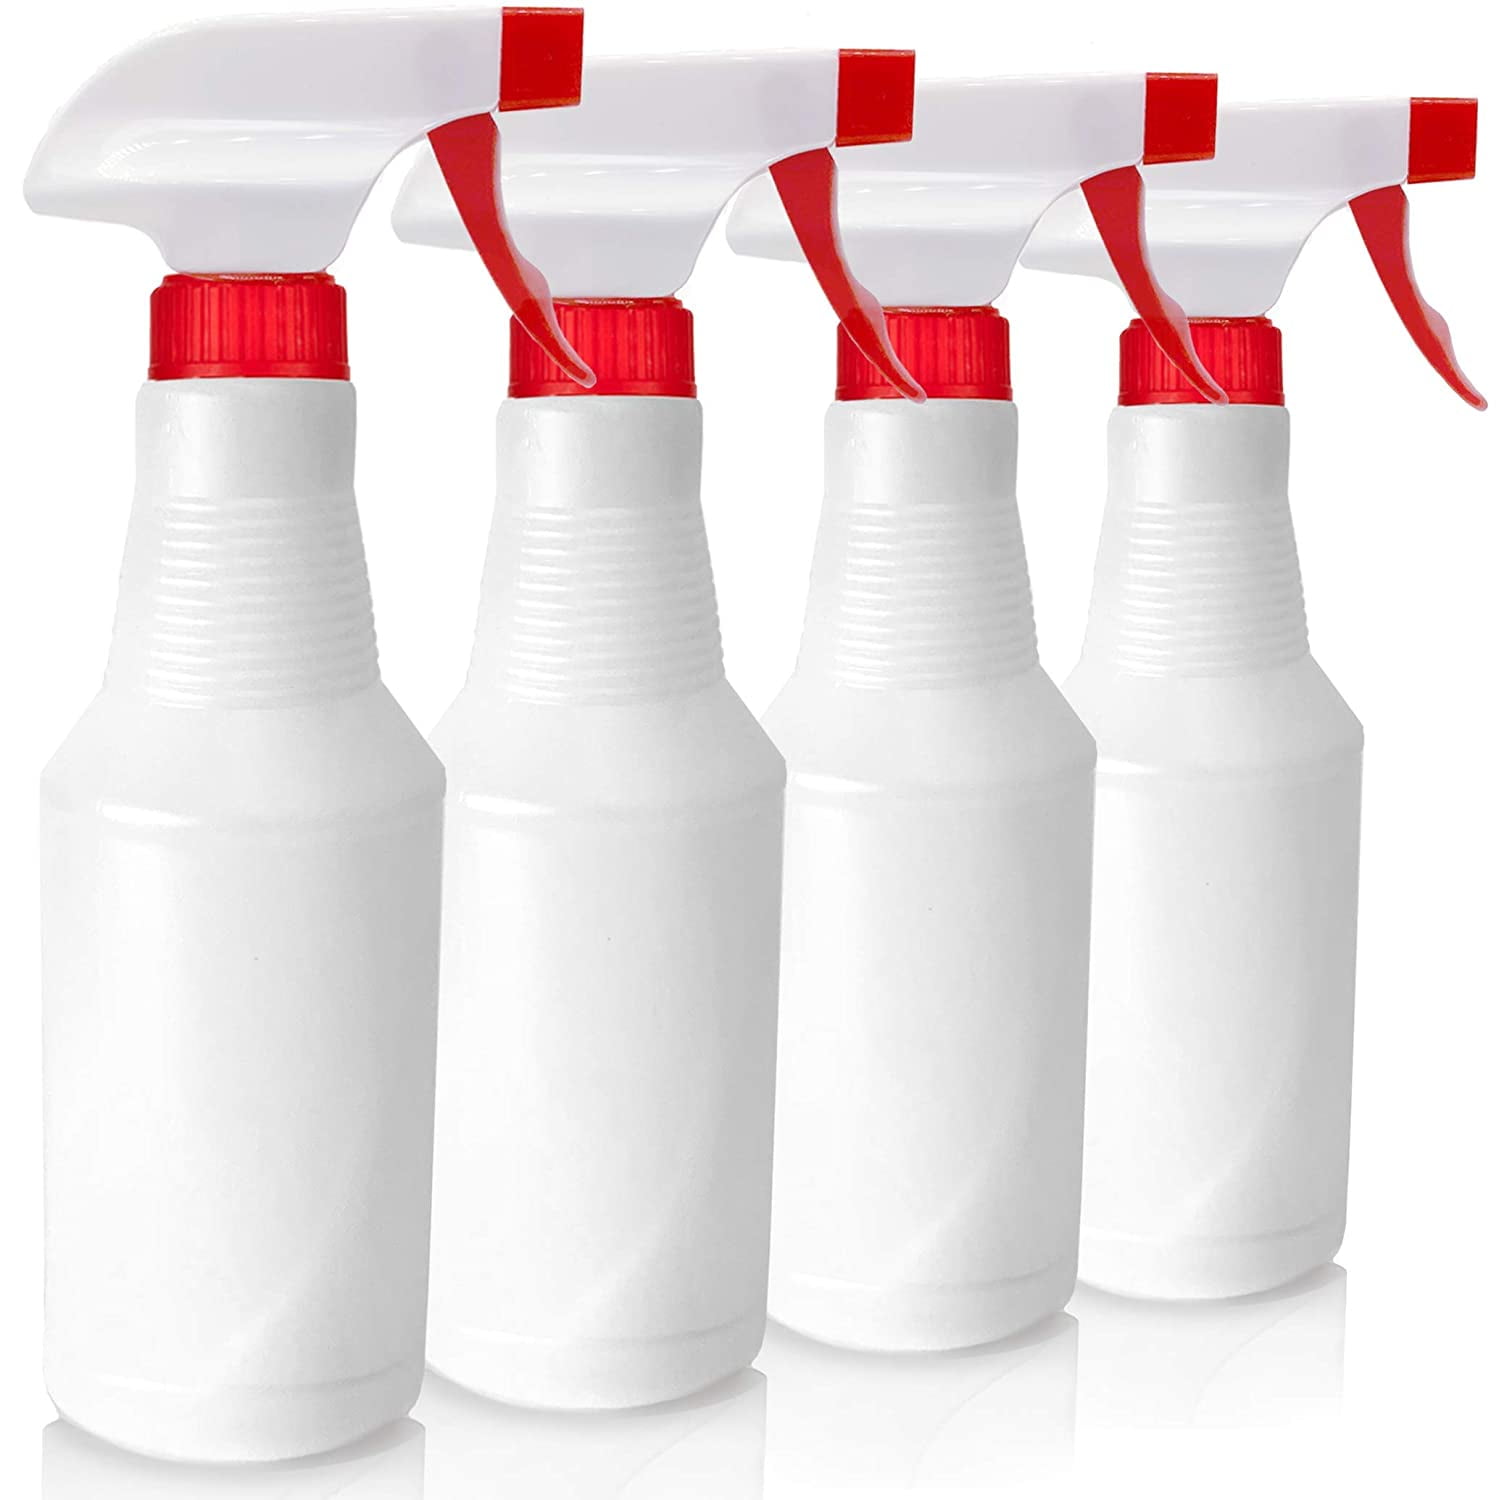 CSBD 16oz Plastic Spray Bottles, Empty and Reusable for Cleaning Solutions, Water, Auto Detailing, or Bathroom and Kitchen, Commercial and Residential